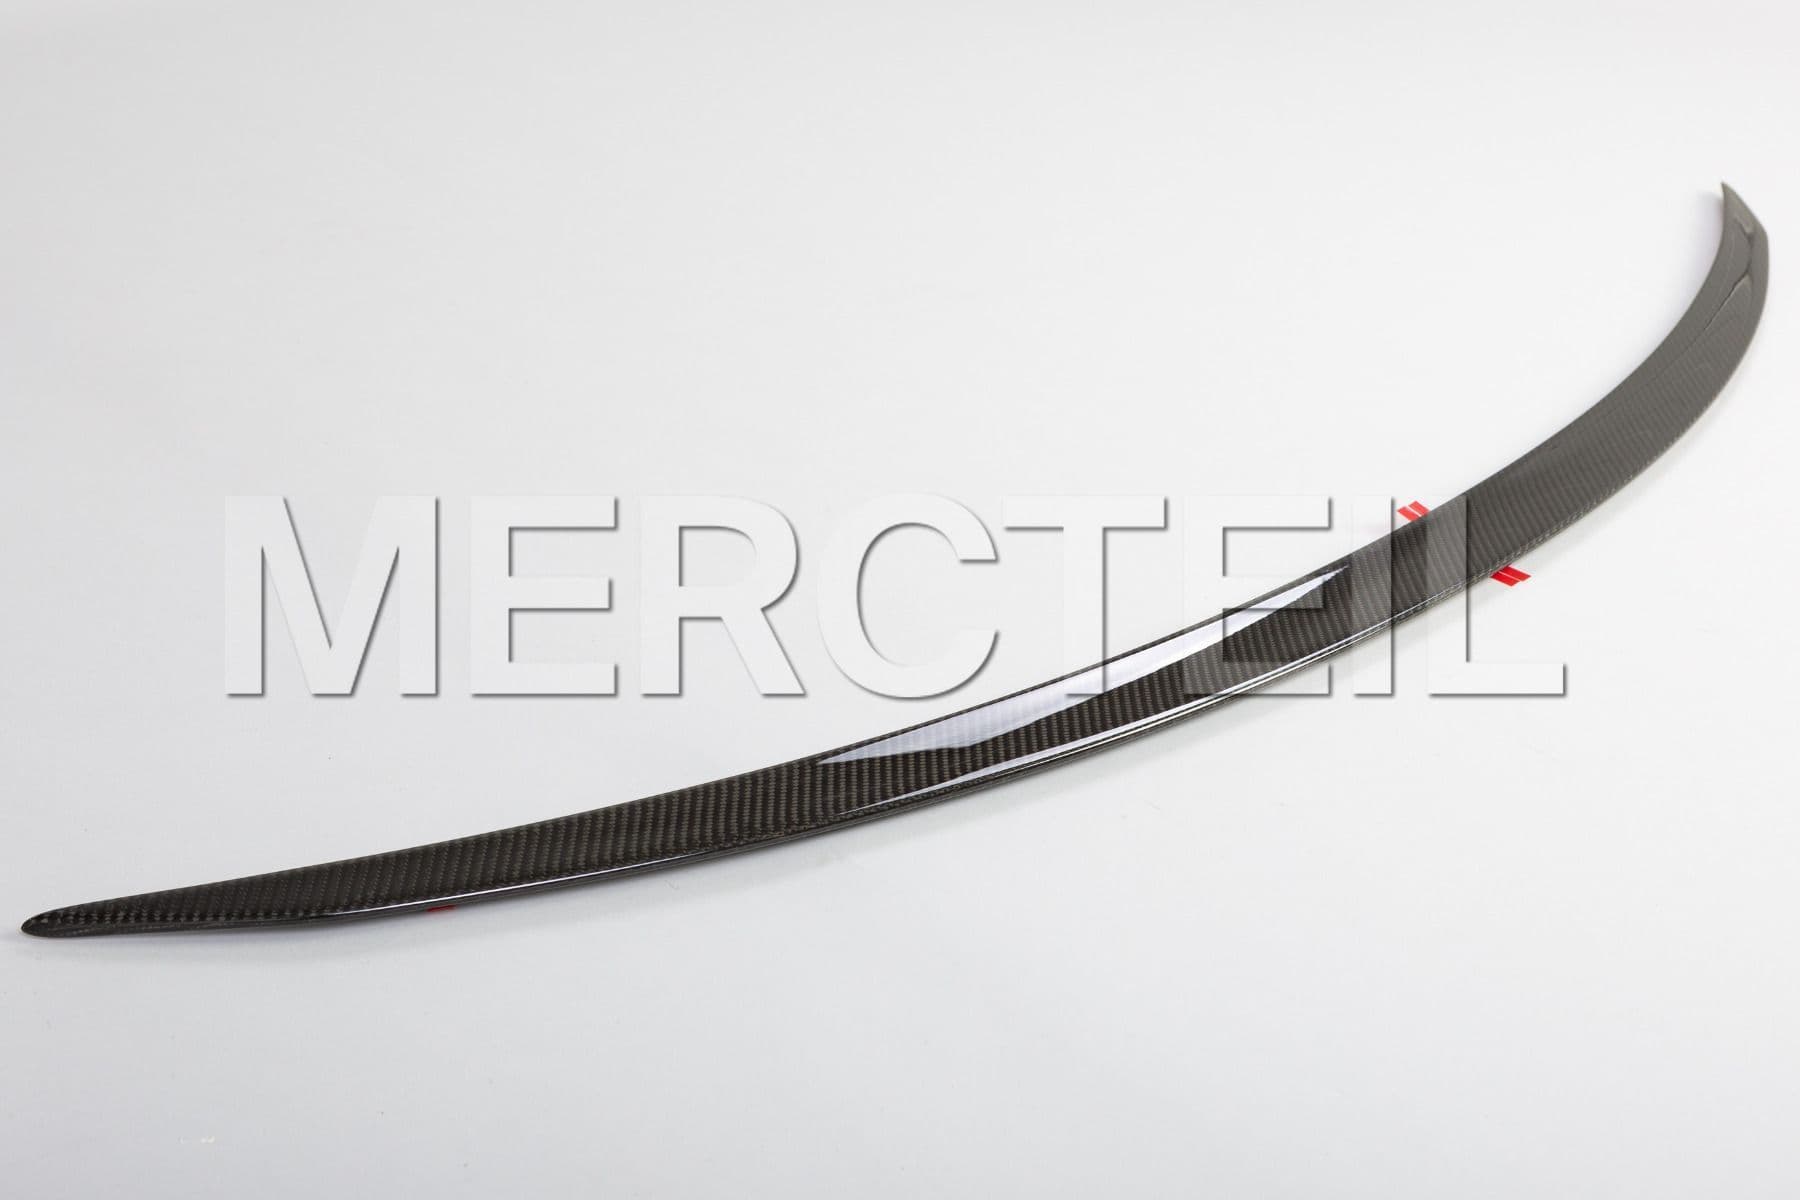 AMG Carbon Fiber Lid Spoiler for S-Class Coupe (part number: A21779001007K79)